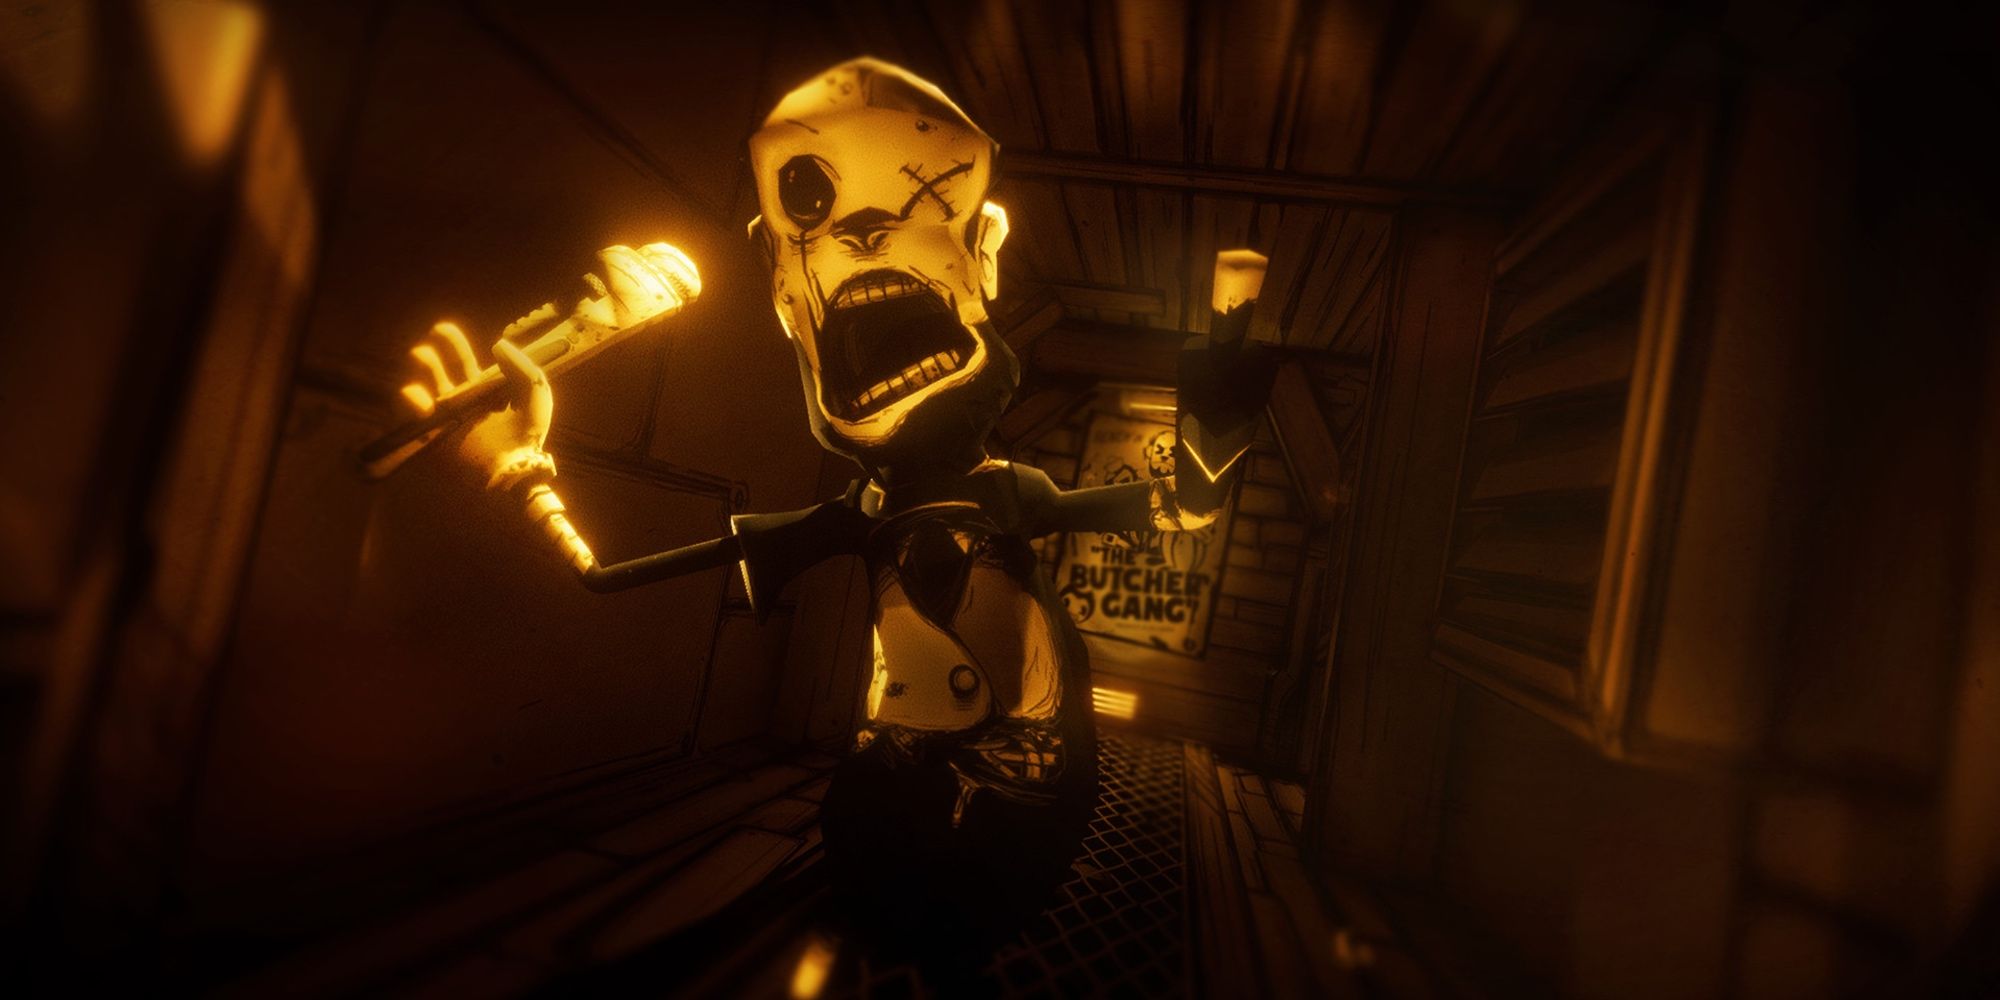 7 Best Horror Games For iPads A cartoon monster attacks the player